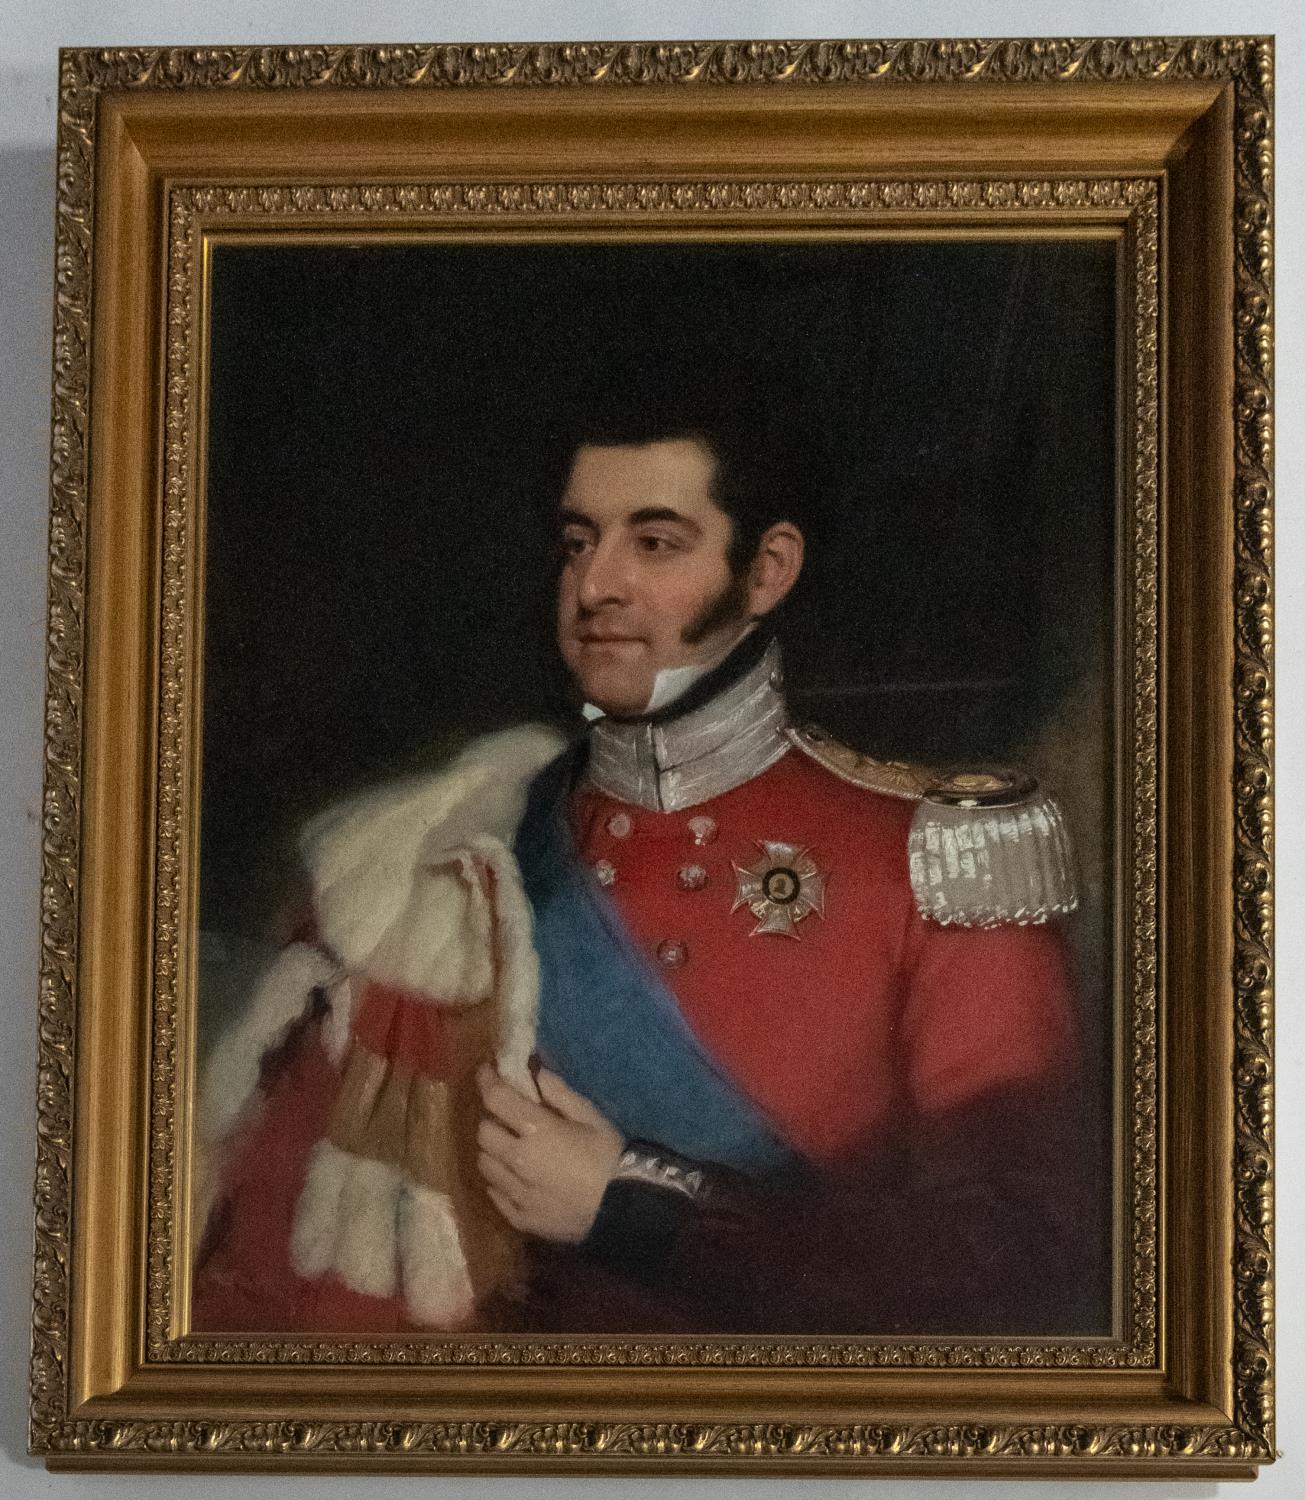 A 19th century oil on canvas portrait stated to be Captain Paul James Henry Butler, 5th Royal